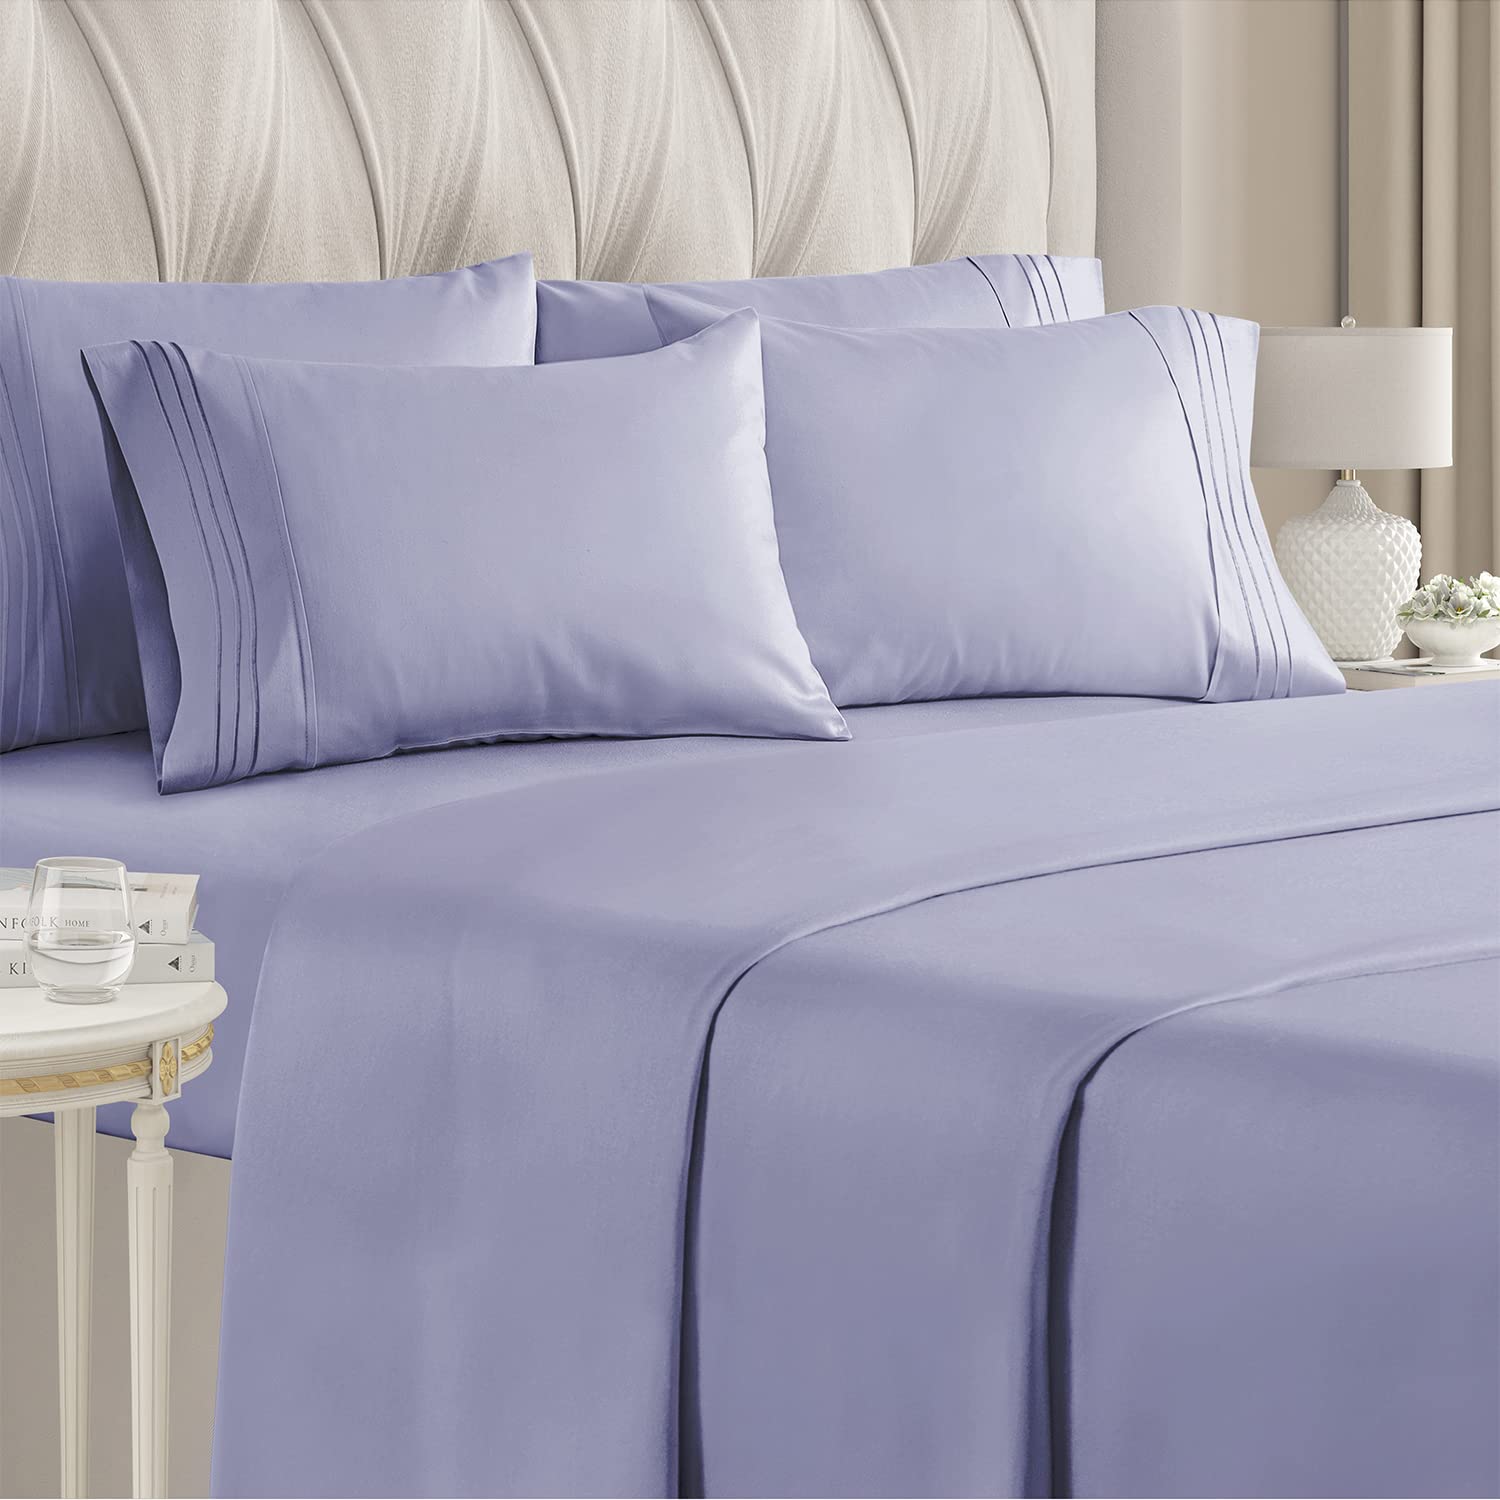 Book Cover King Size Sheet Set - 6 Piece Set - Hotel Luxury Bed Sheets - Extra Soft - Deep Pockets - Easy Fit - Breathable & Cooling Sheets - Wrinkle Free - Comfy - Lavender Bed Sheets - Kings Sheets - 6 PC 18 - Lavender King